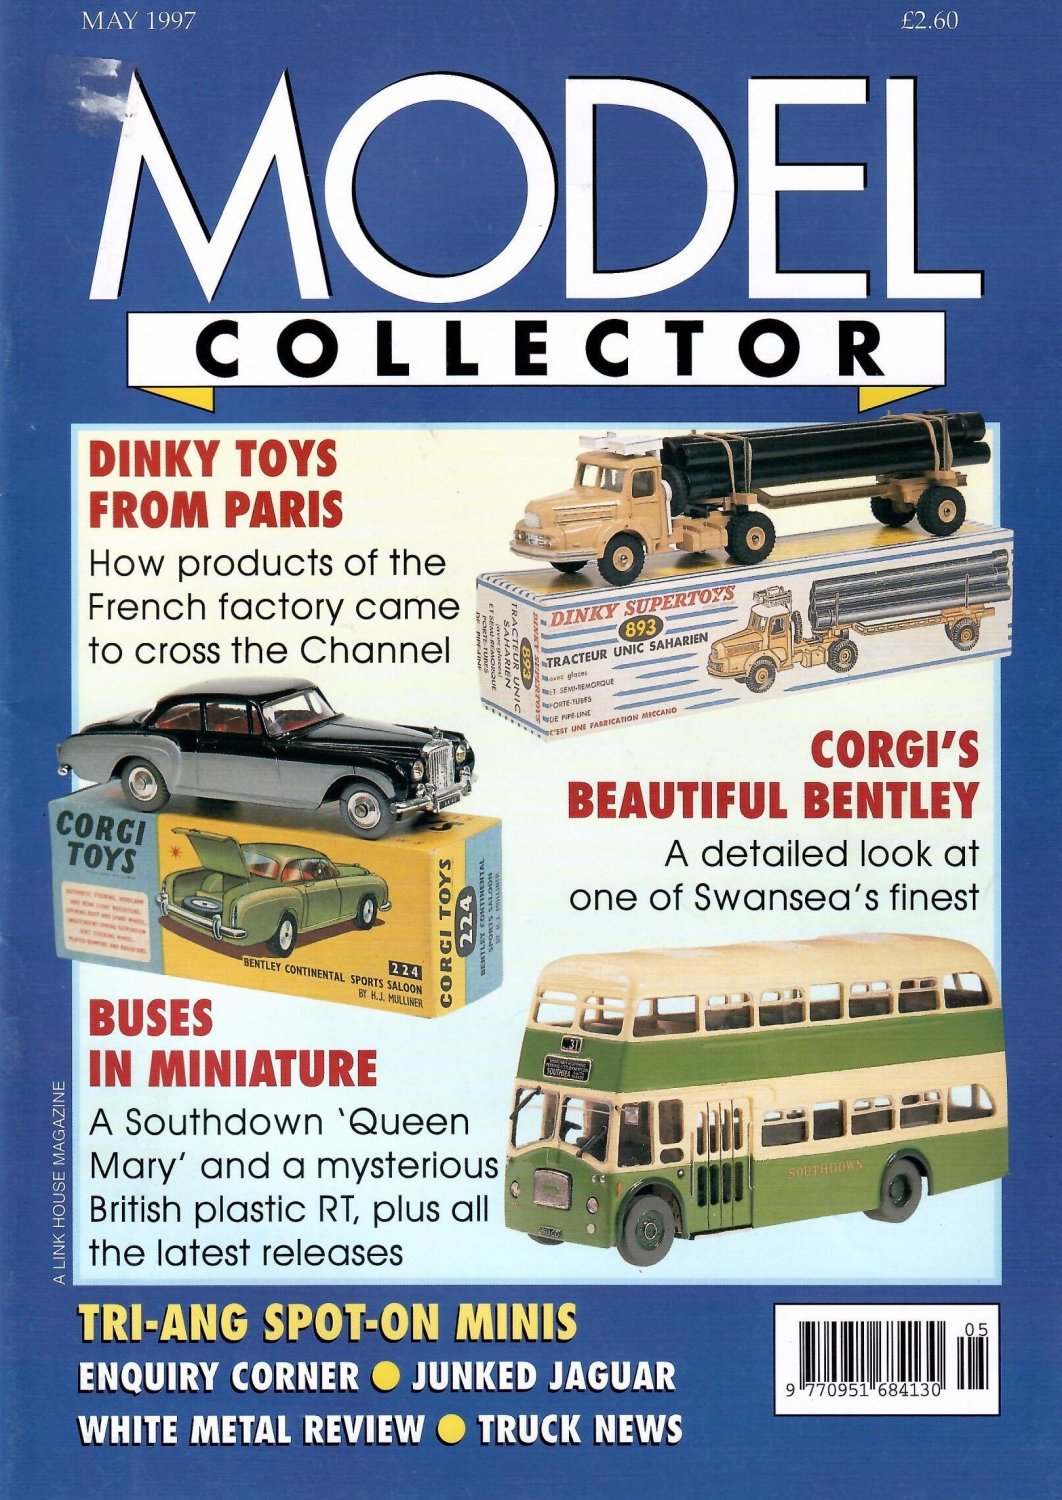 MODEL COLLECTOR MAGAZINE May 1997 TACOT Tri-ang SPOT-ON FRENCH DINKY TOYS